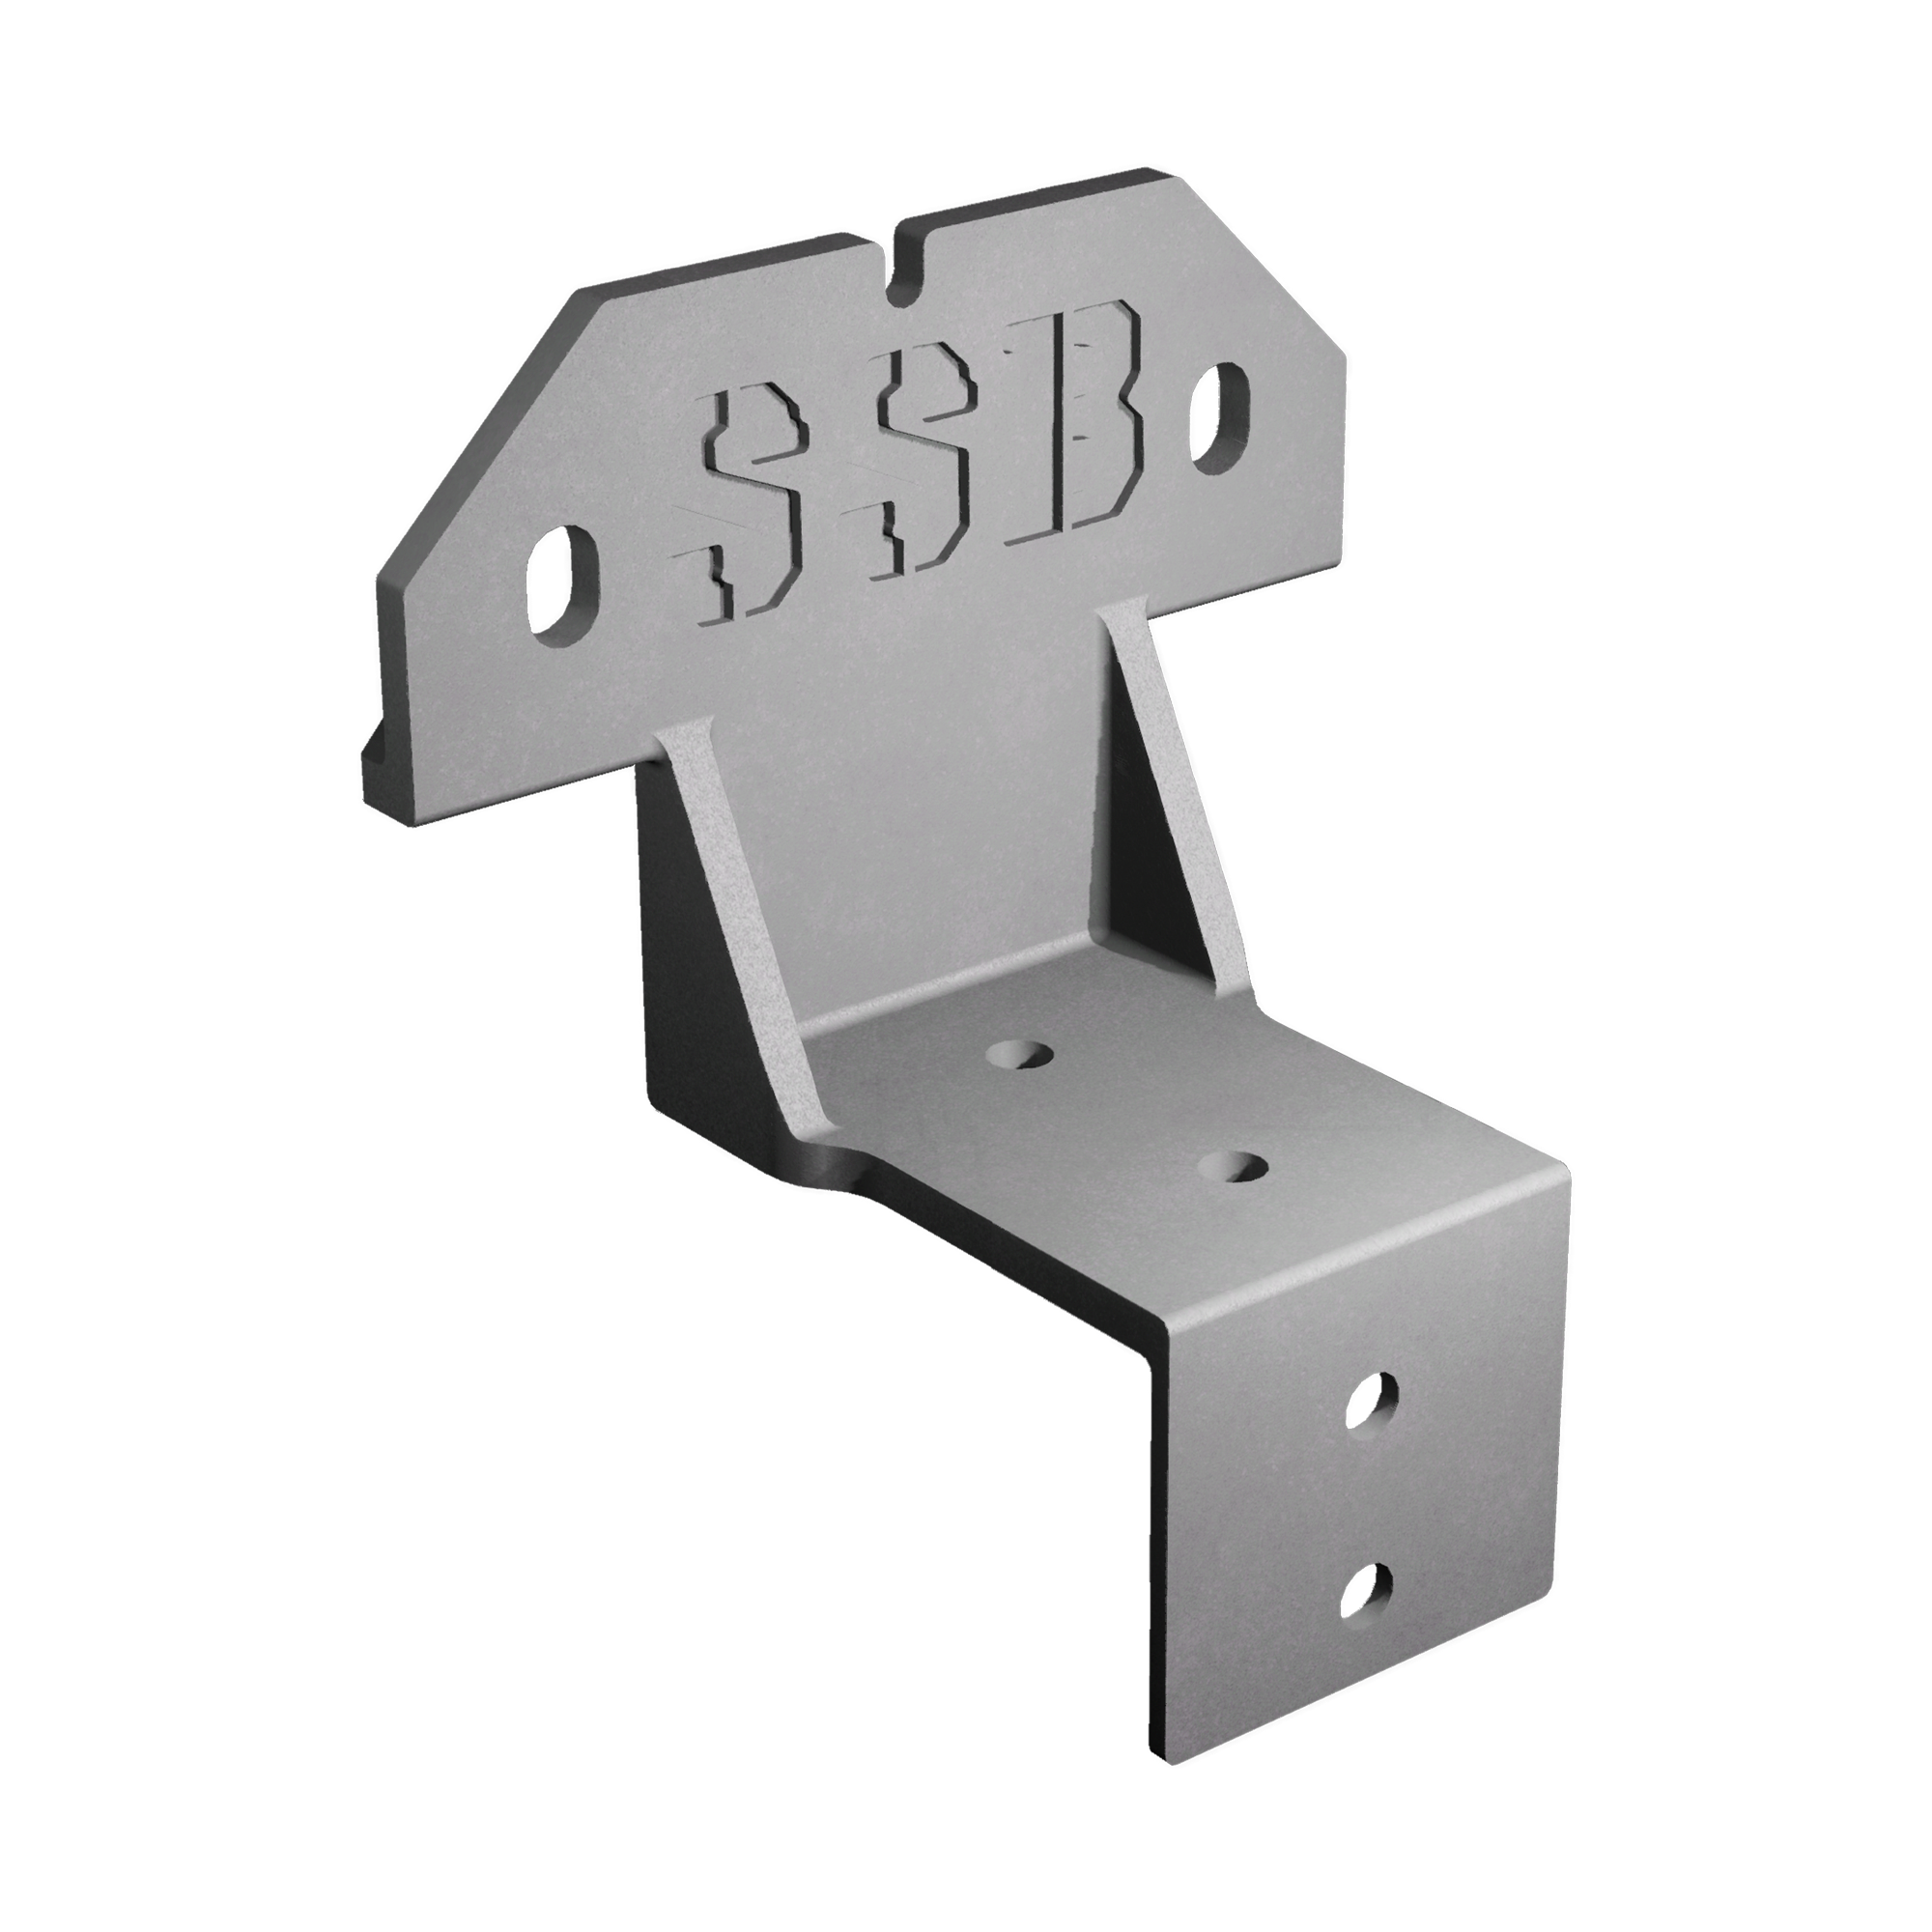 Composite Steel Stud Framing Brackets for the inside of Shipping Containers/Sea Cans